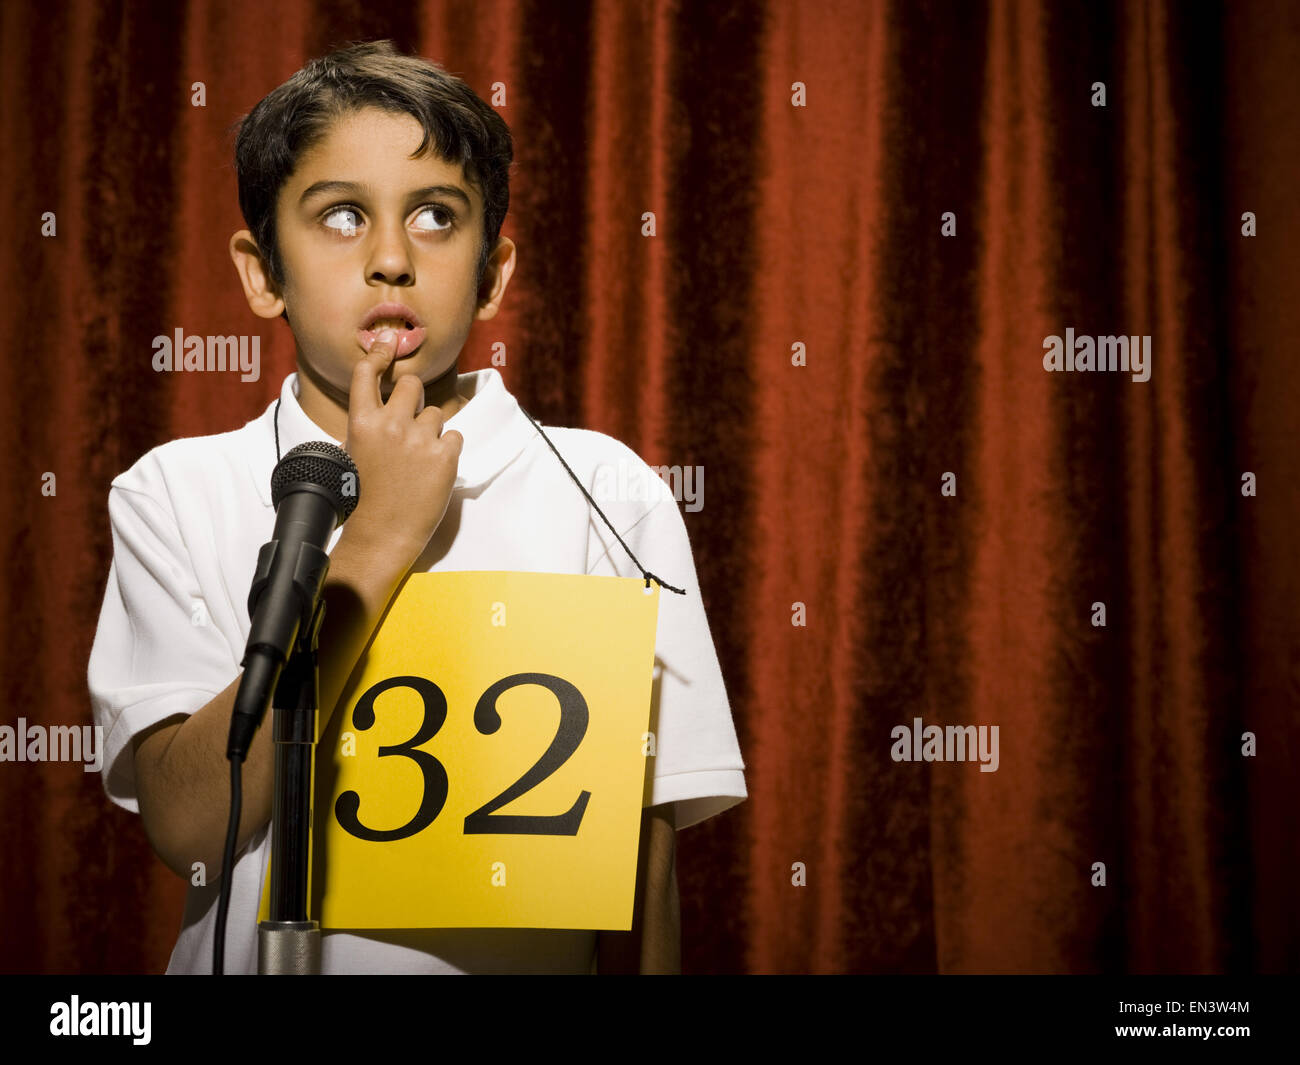 Boy contestant standing at microphone thinking Stock Photo